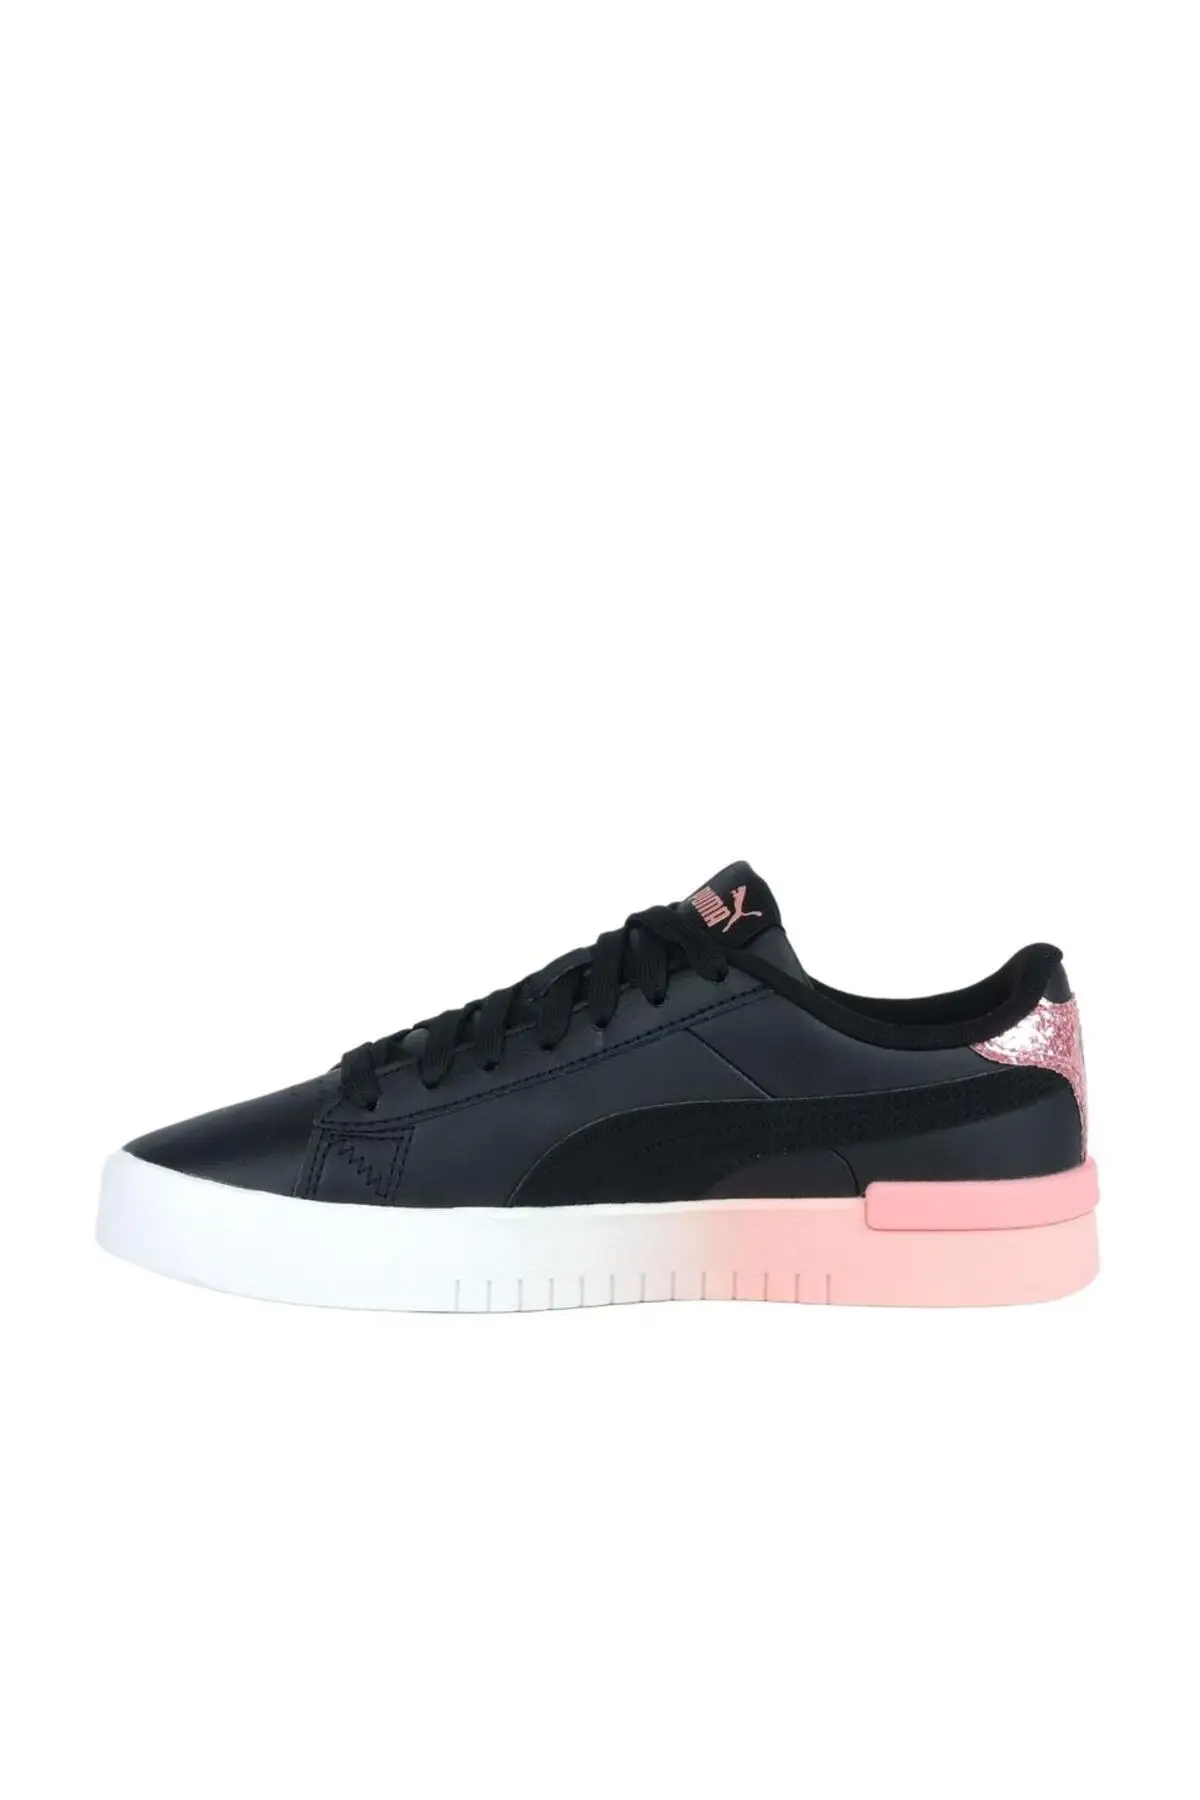 The Ultimate Guide to Women’s Puma Tennis Shoes插图1